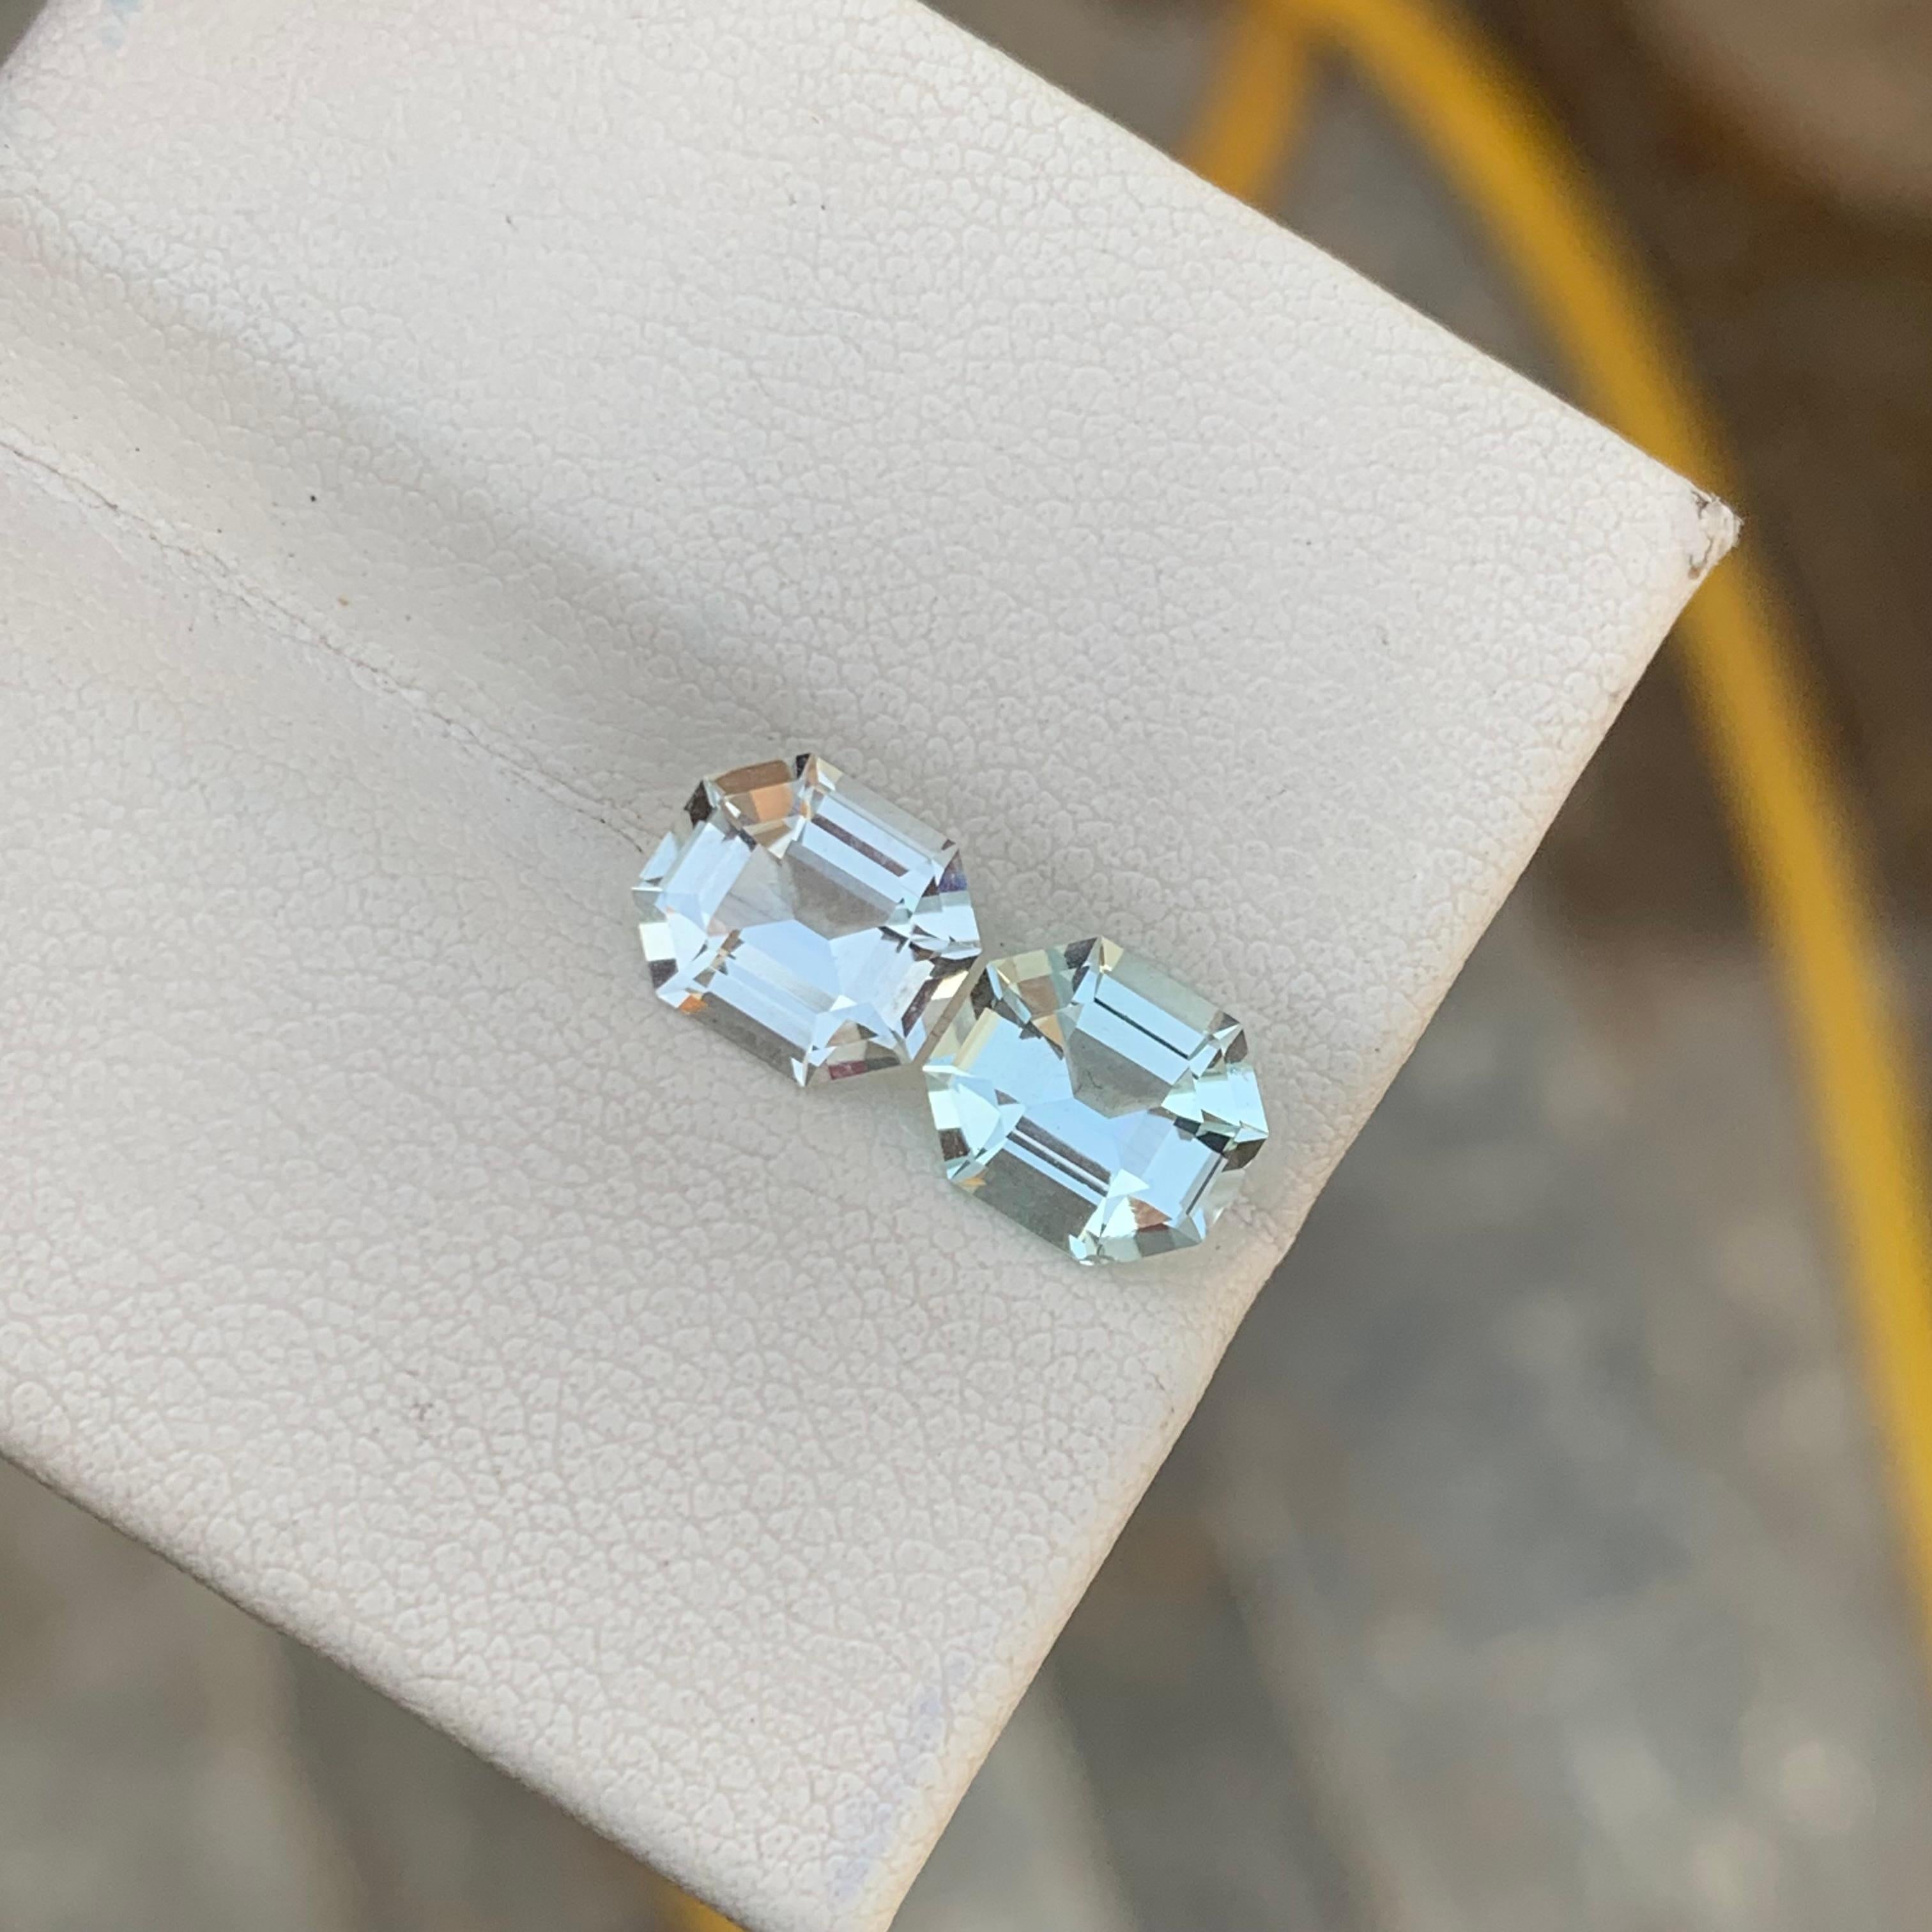 Gorgeous Natural Loose Aquamarine Pair For Earrings Jewelry 3.05 Carats  3